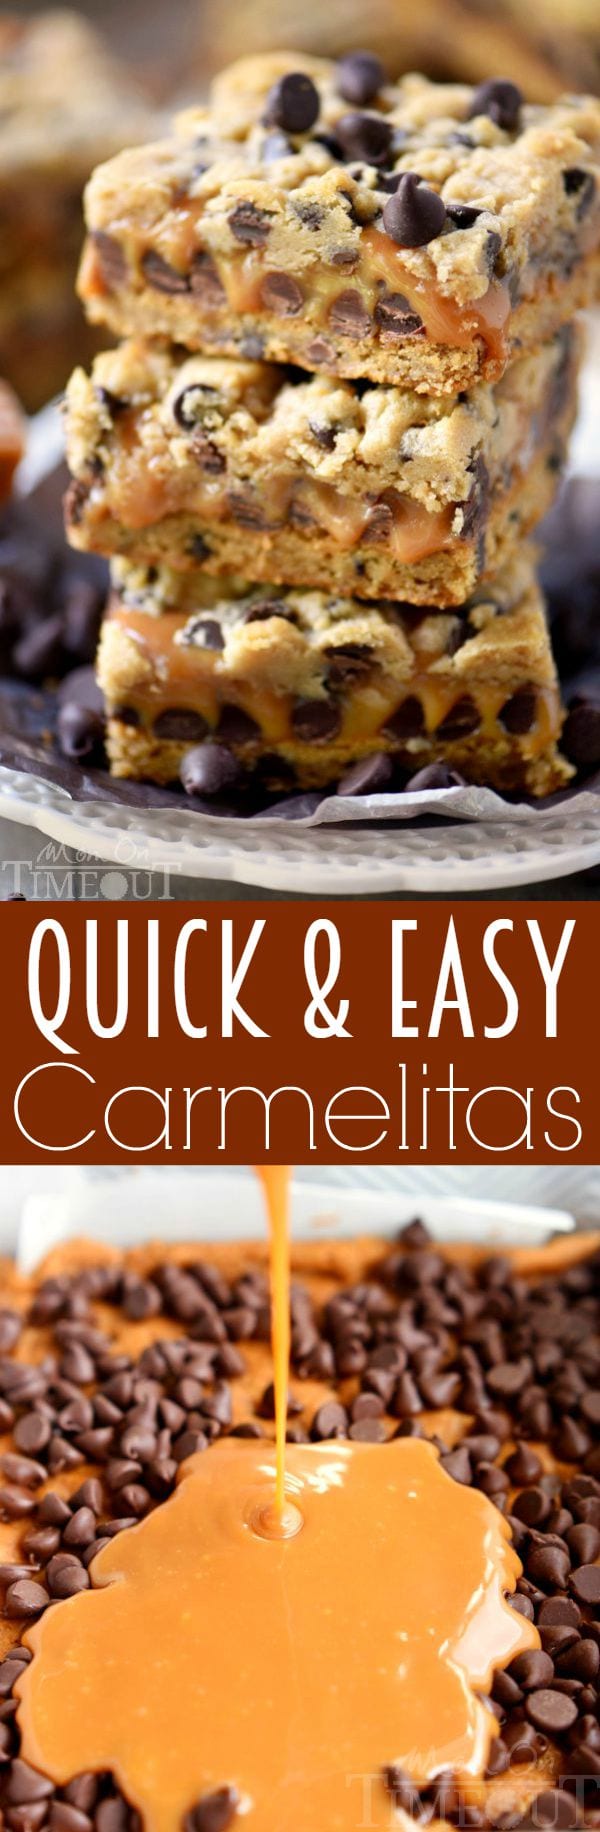  These Quick and Easy Carmelitas use only four ingredients! A truly decadent treat, the ooey, gooey caramel center of these amazing bars is impossible to resist! An easy dessert recipe ANYONE can make! | MomOnTimeout.com | #recipe #easy